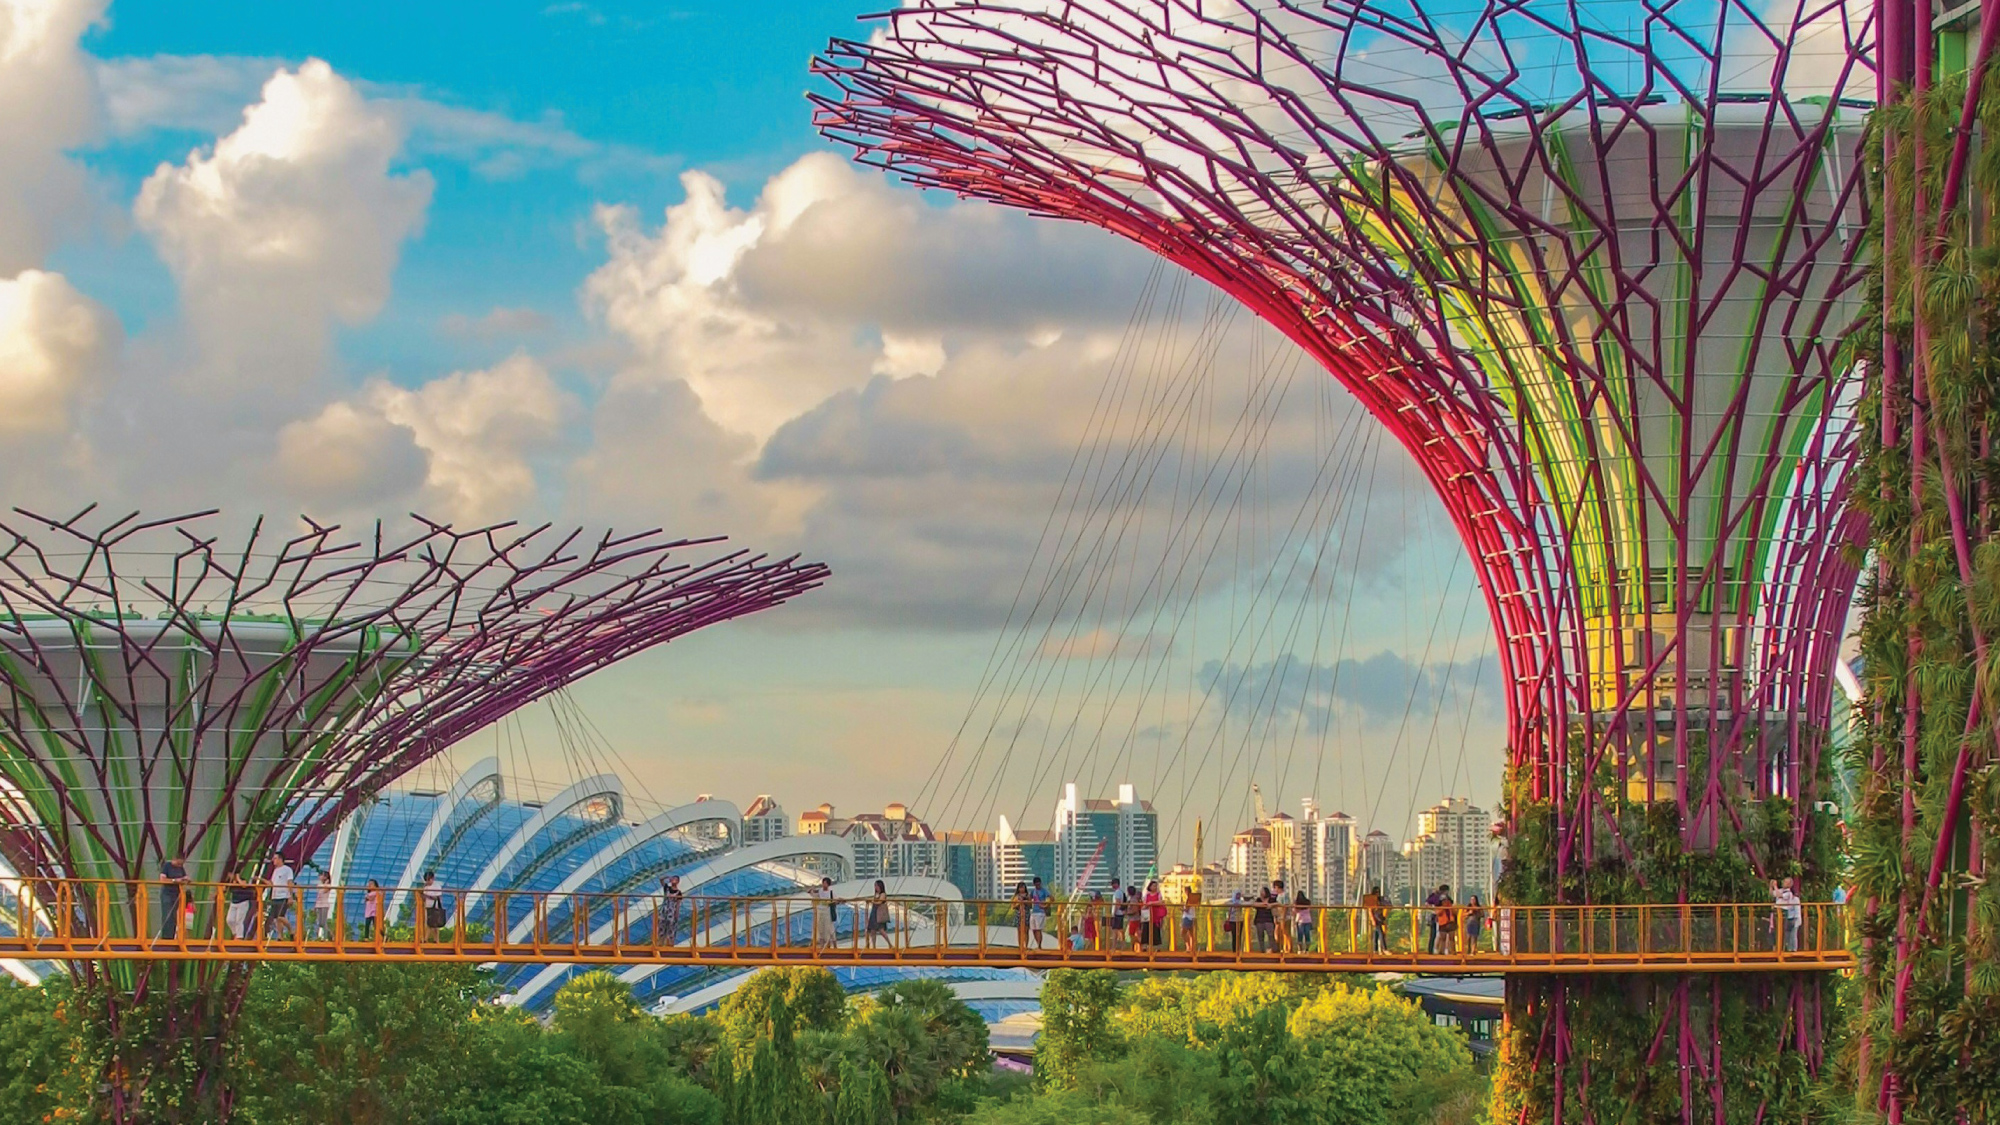 Gardens by the Bay with its towering Supertrees.